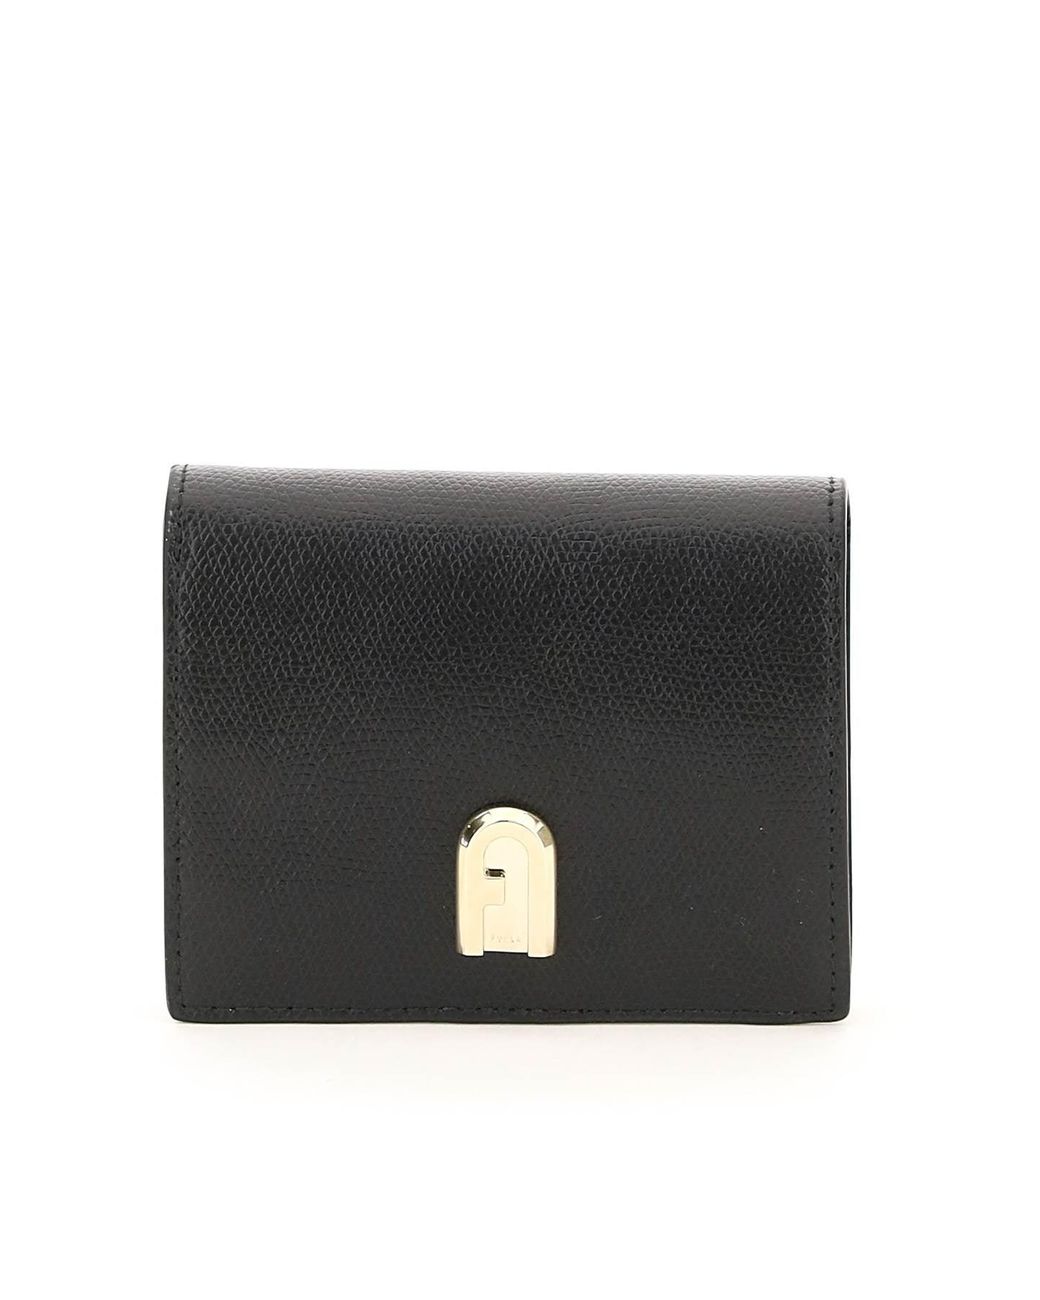 Furla Leather '1927' Compact Wallet in Black | Lyst